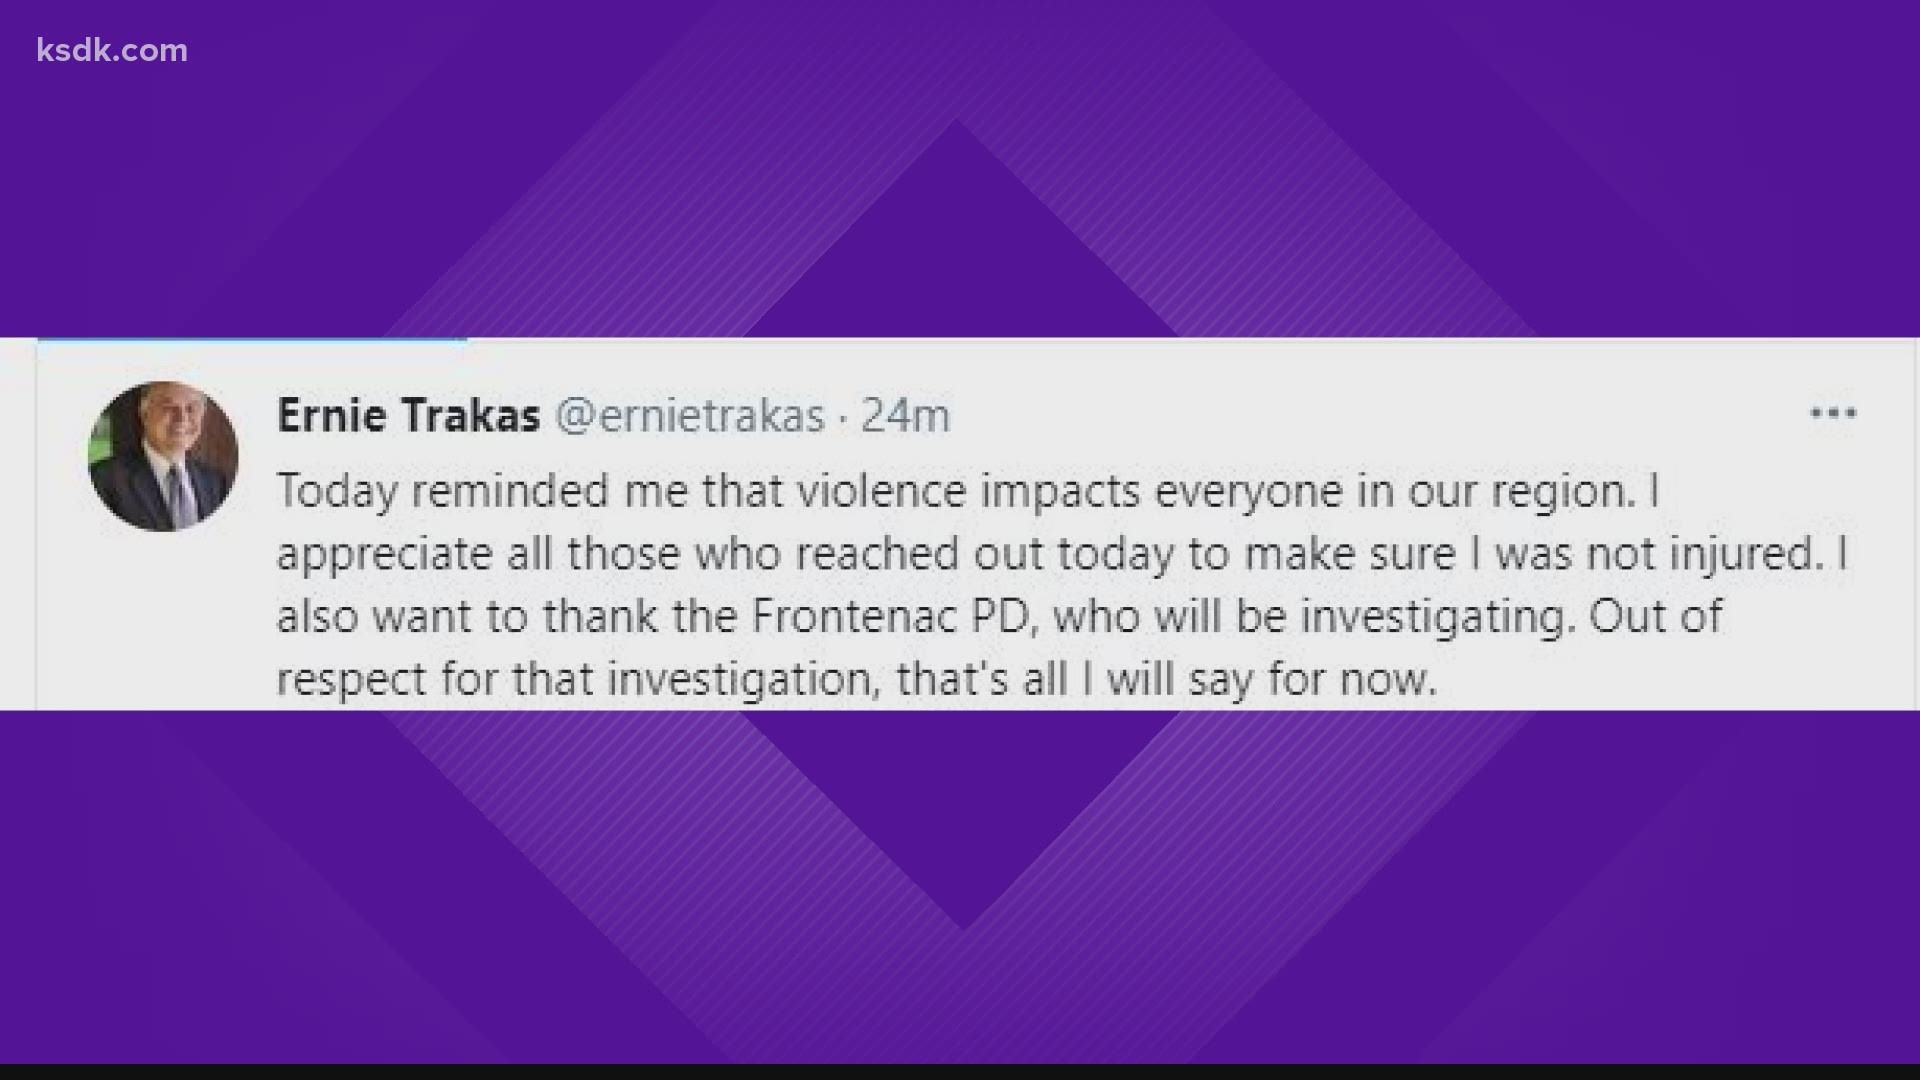 He tweets, "Today reminded me that violence impacts everyone in our region"